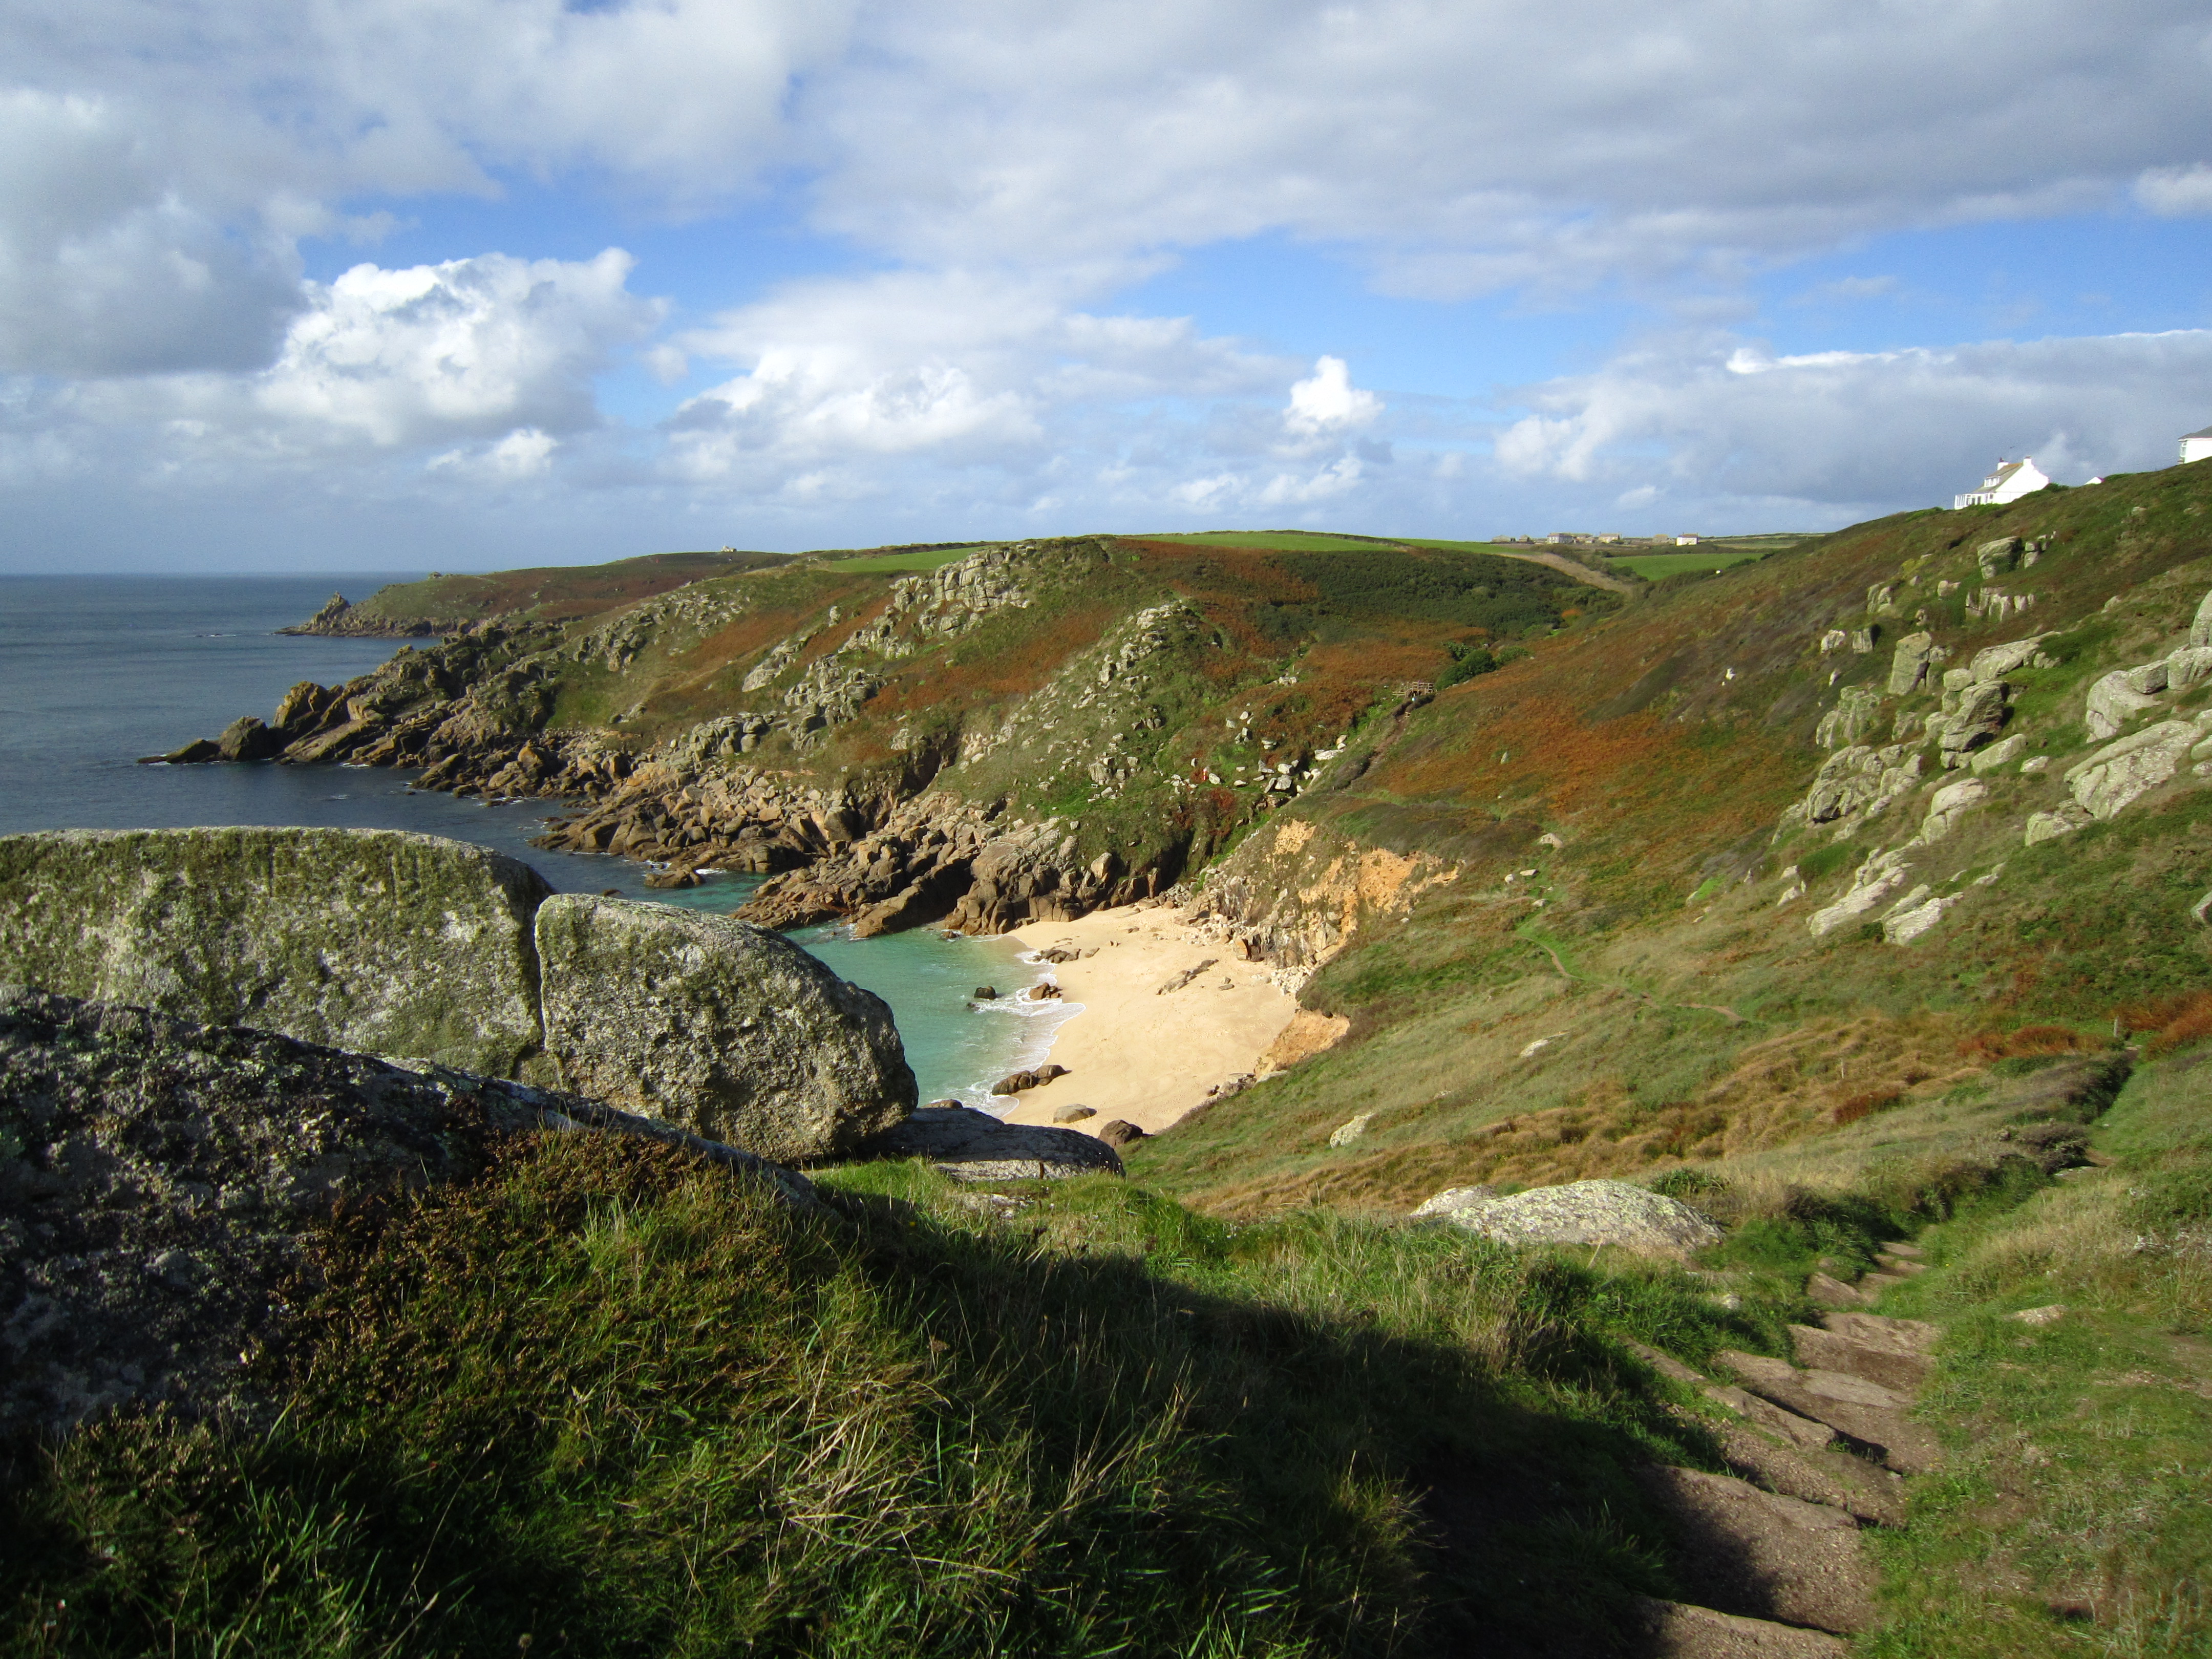 Near to Porthcurno, that is all I'm saying!